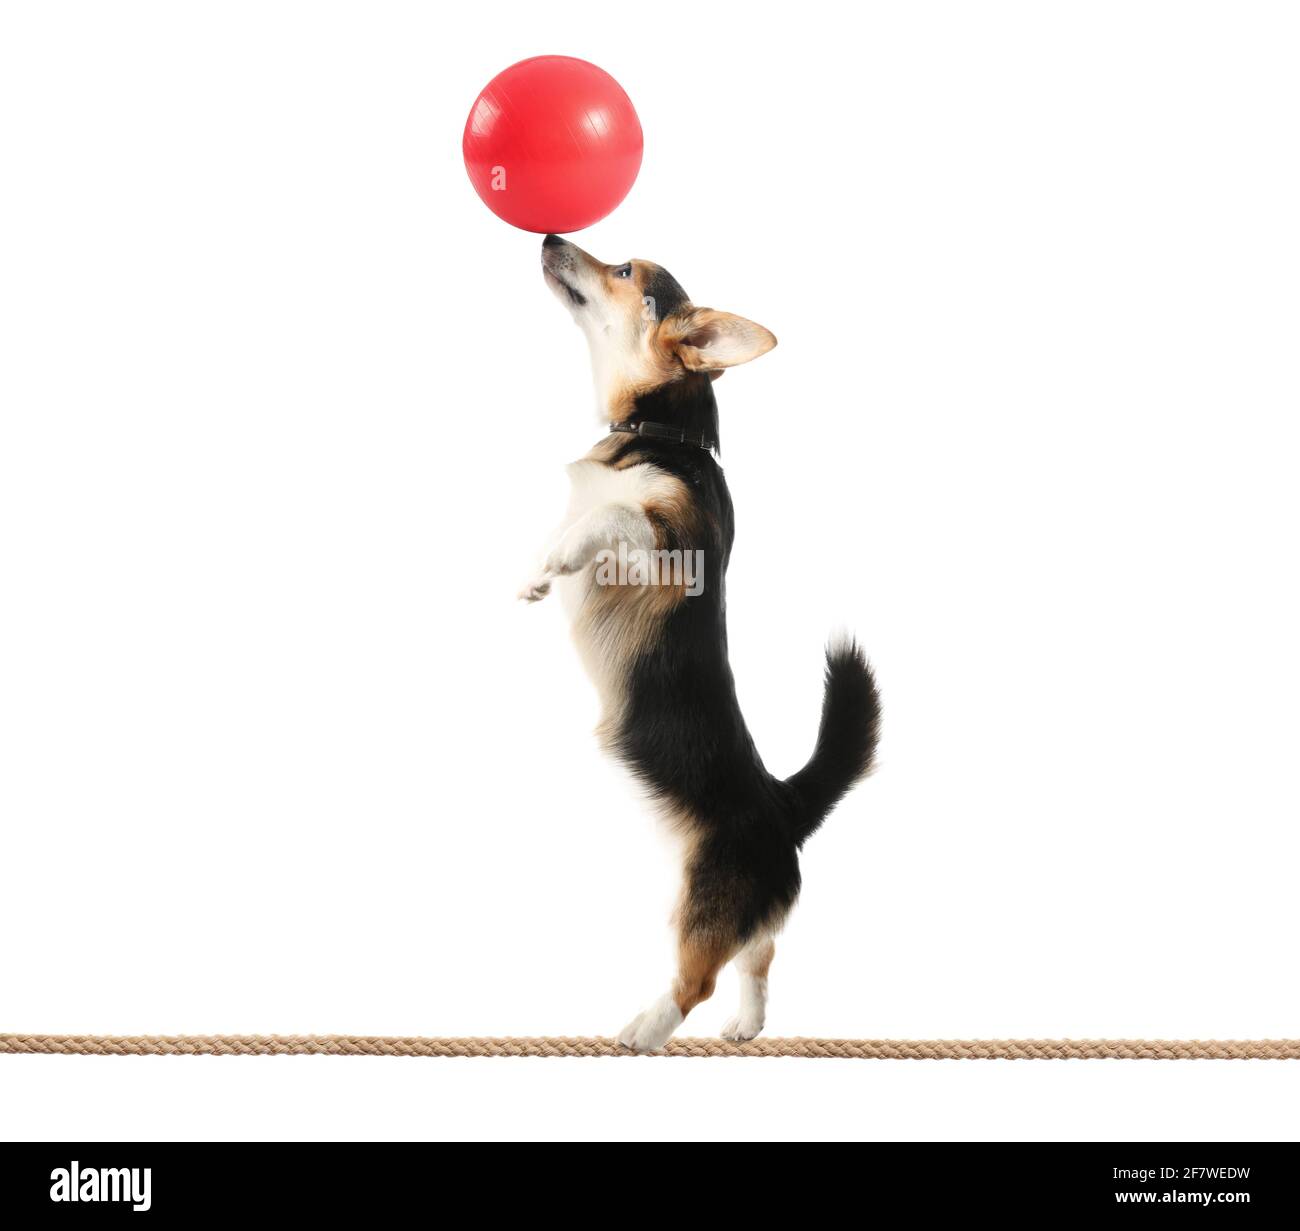 Circus dog with ball walking on a wire against white background Stock Photo